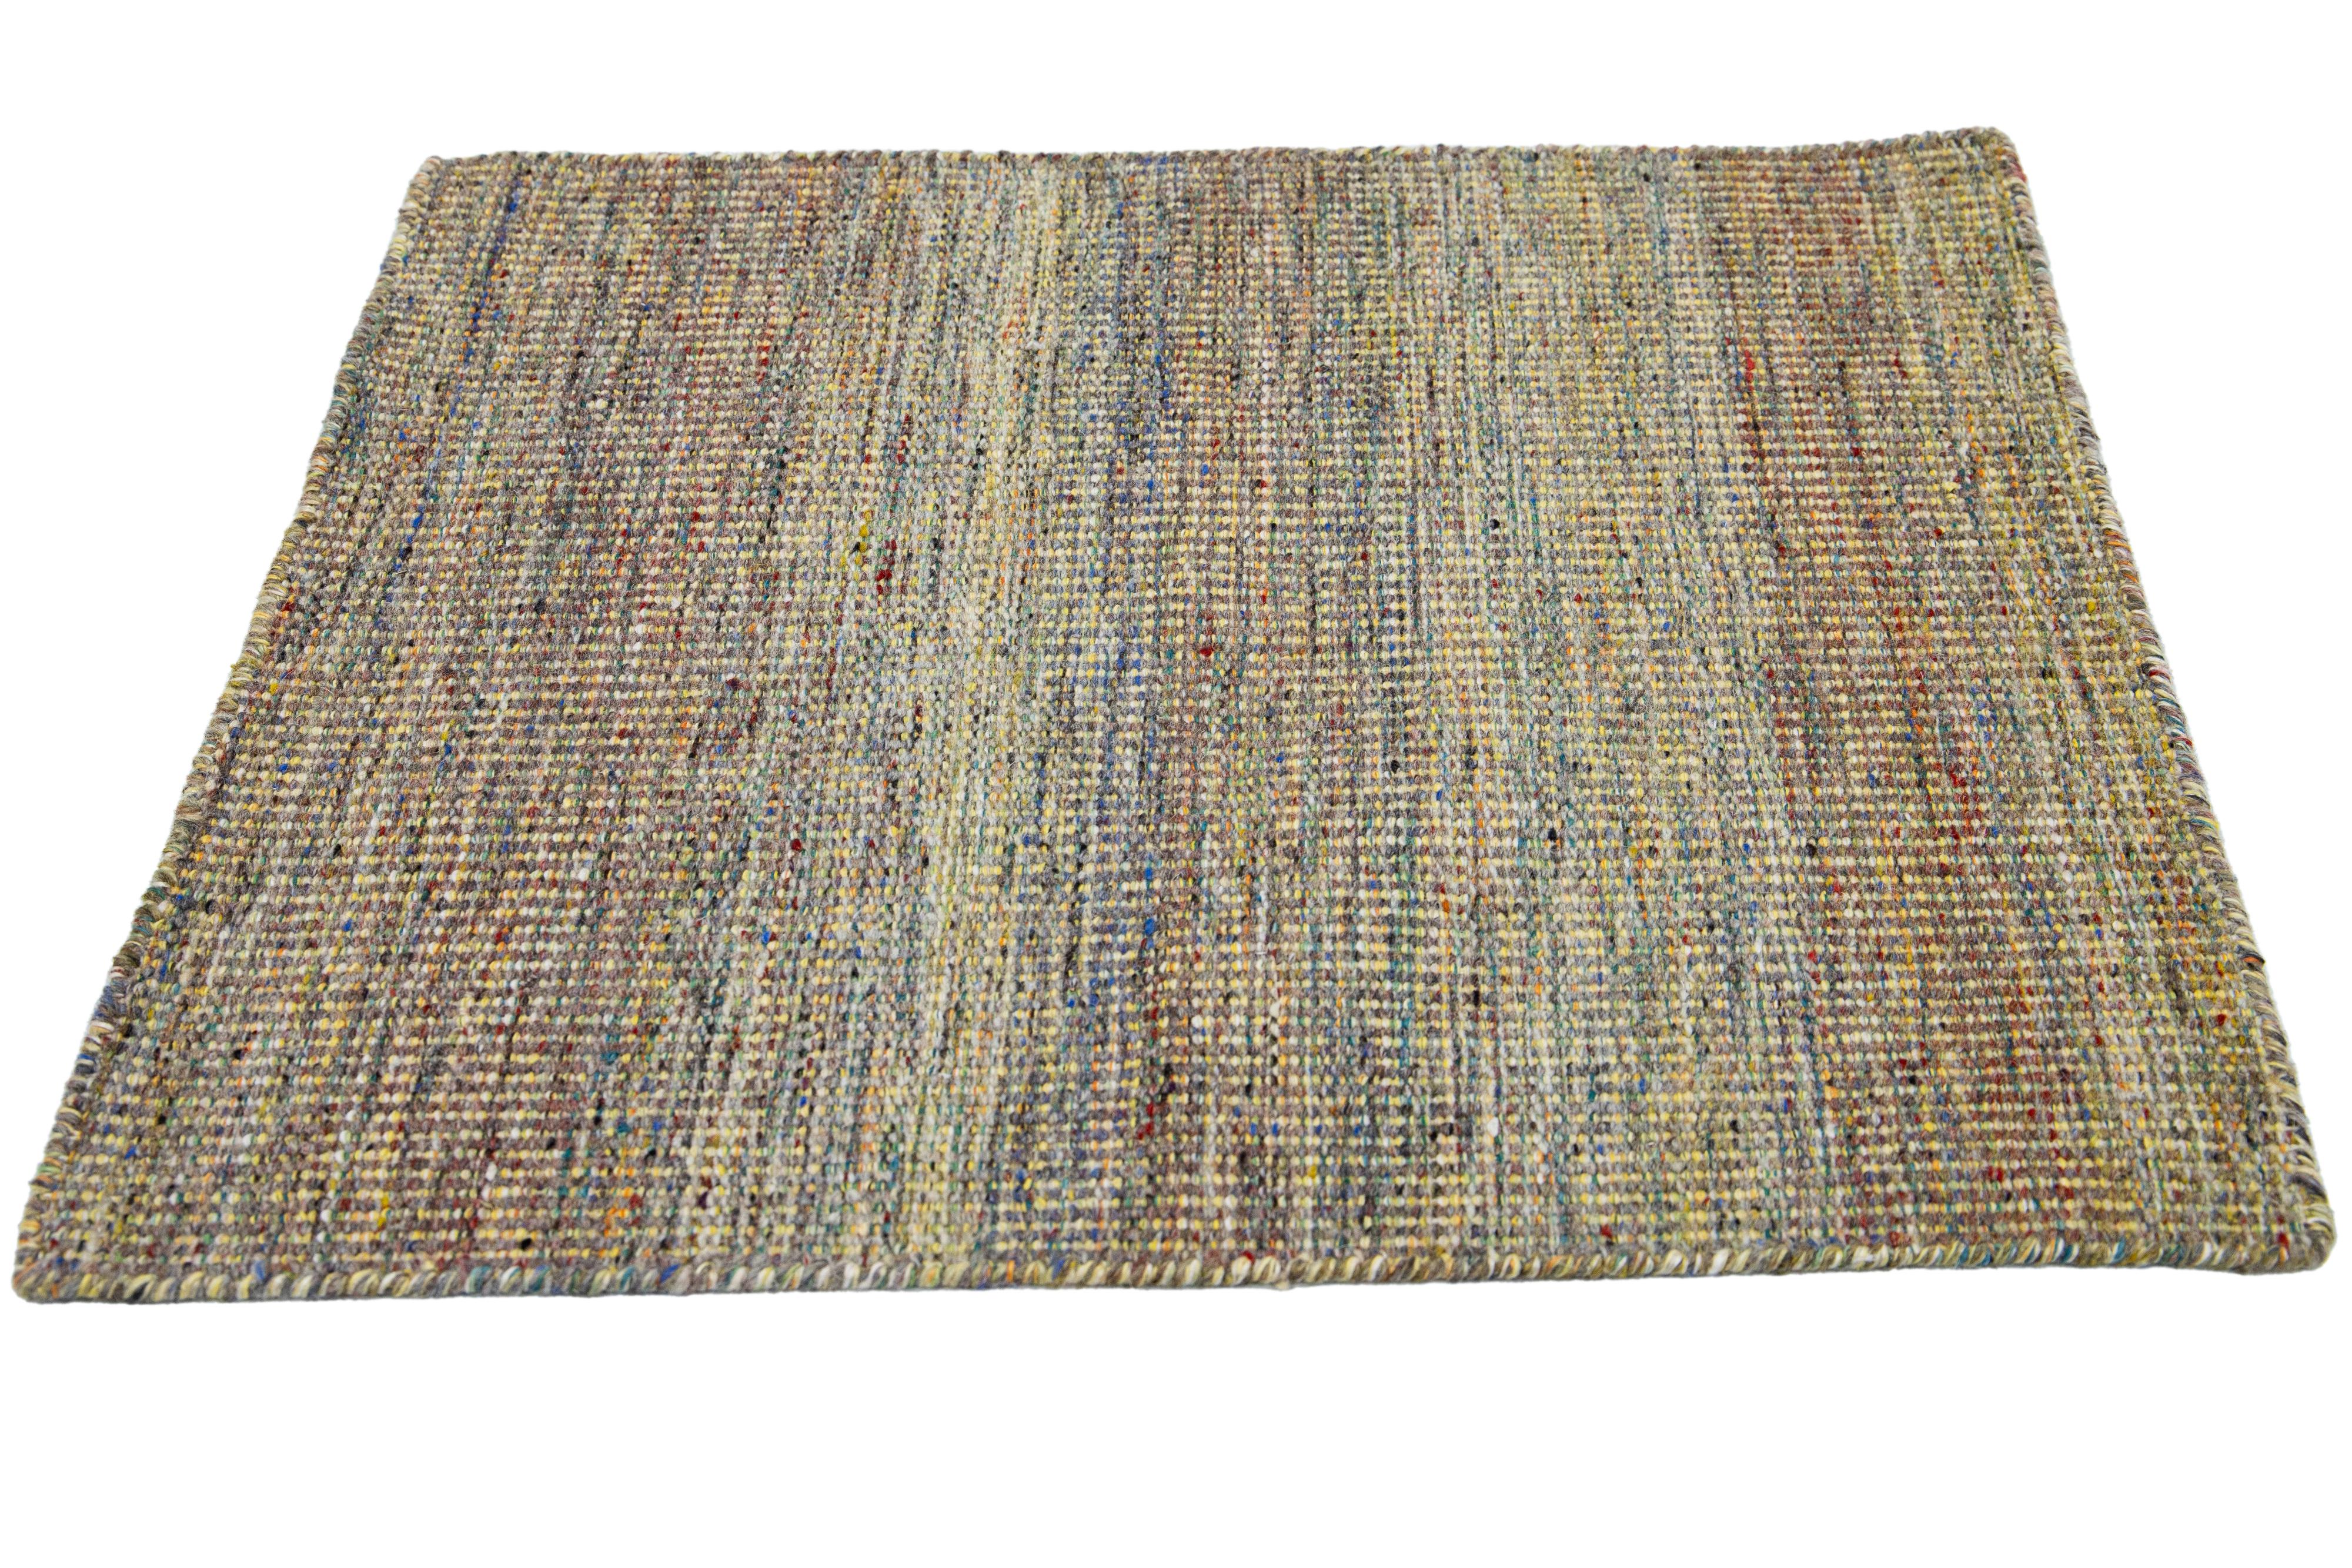 Apadana's Kilim flatweave wool custom rug. Custom sizes and colors made-to-order.

Material: Wool.
Techniques: Flatweave.
Style: Solid-Coastal.
Lead time: Approx. 15-16 weeks available.
Colors: As shown, other custom colors are